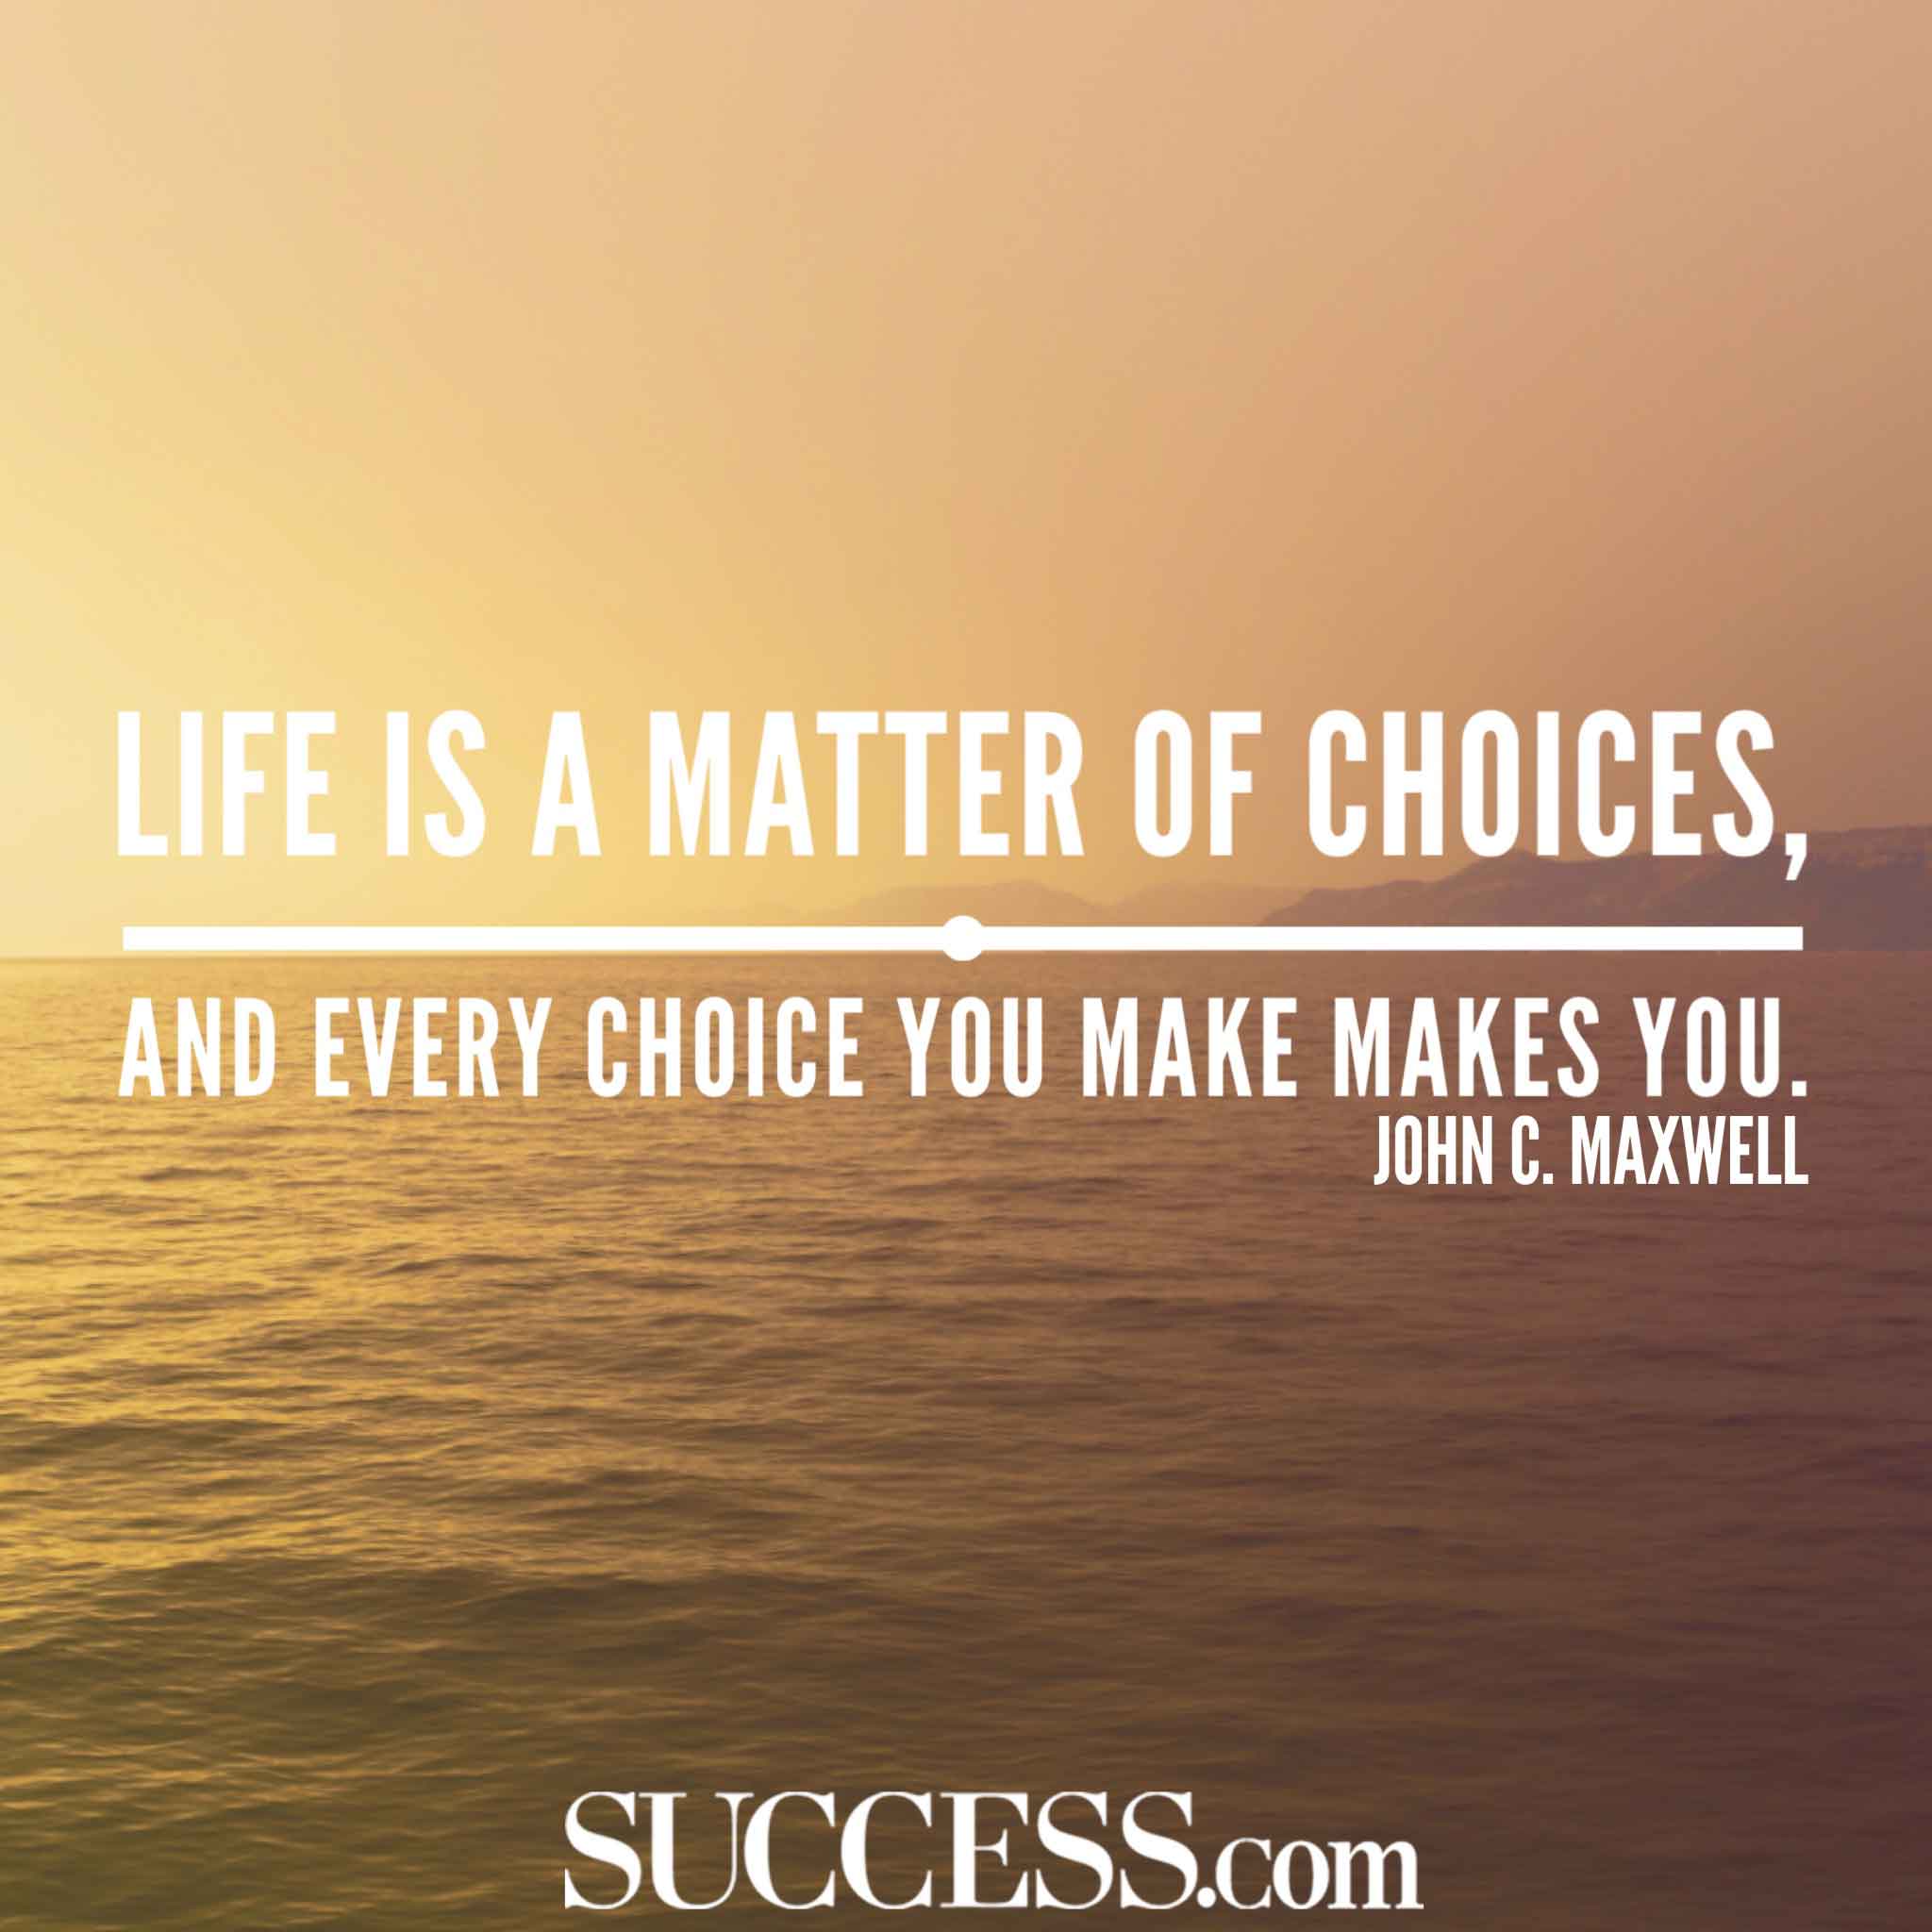 13 Quotes About Making Life Choices | SUCCESS